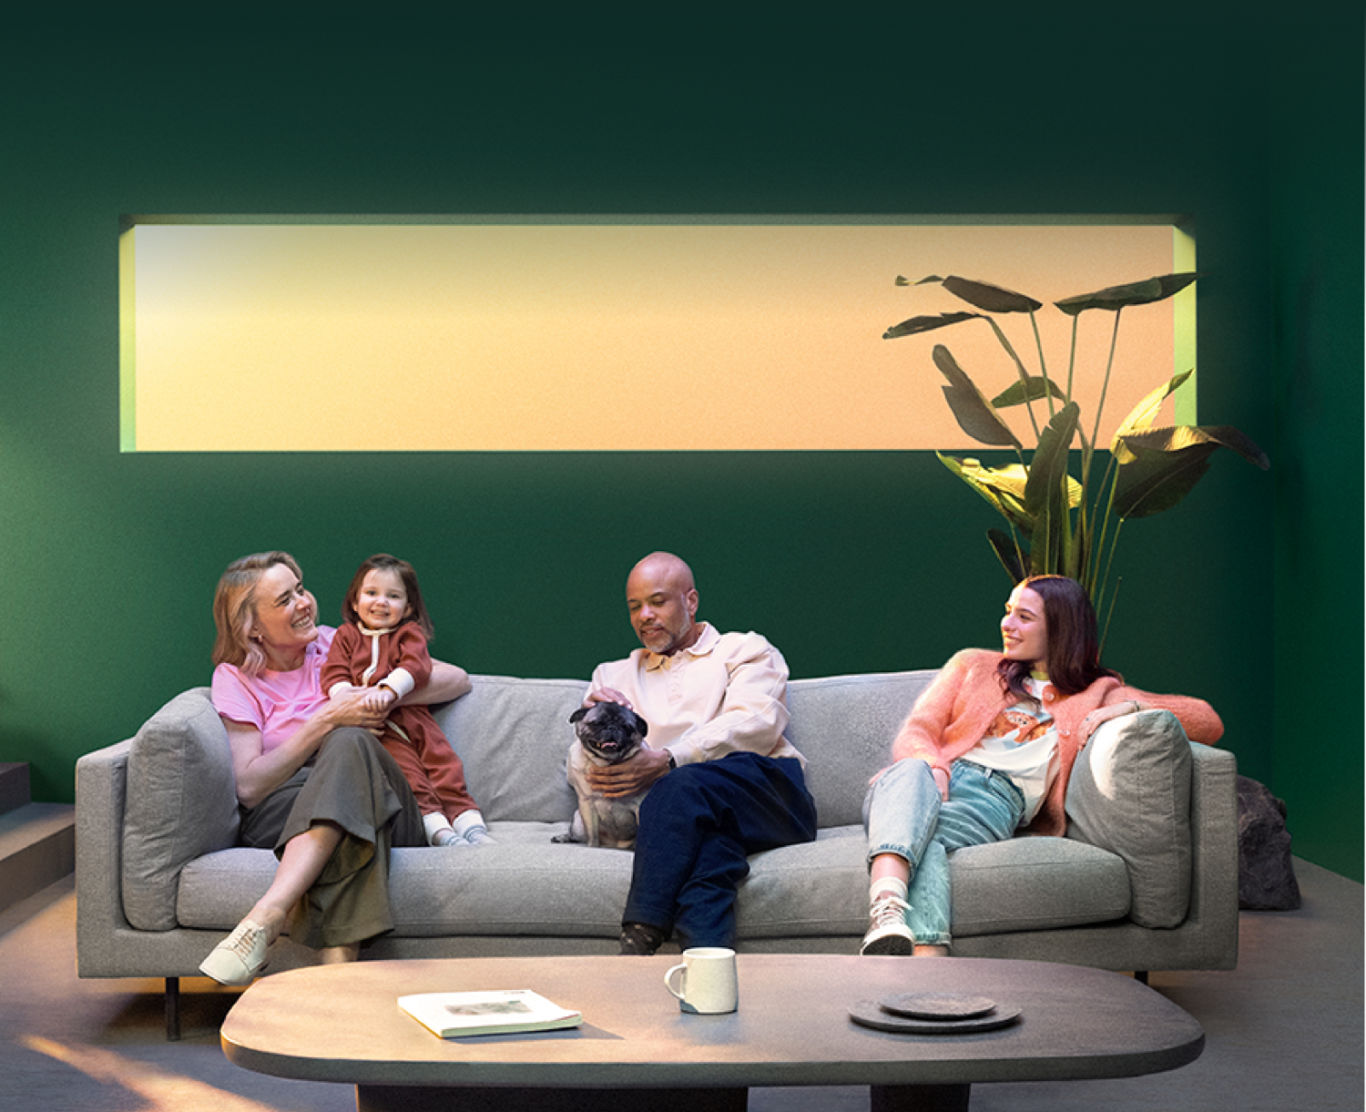 A family sitting in a living room